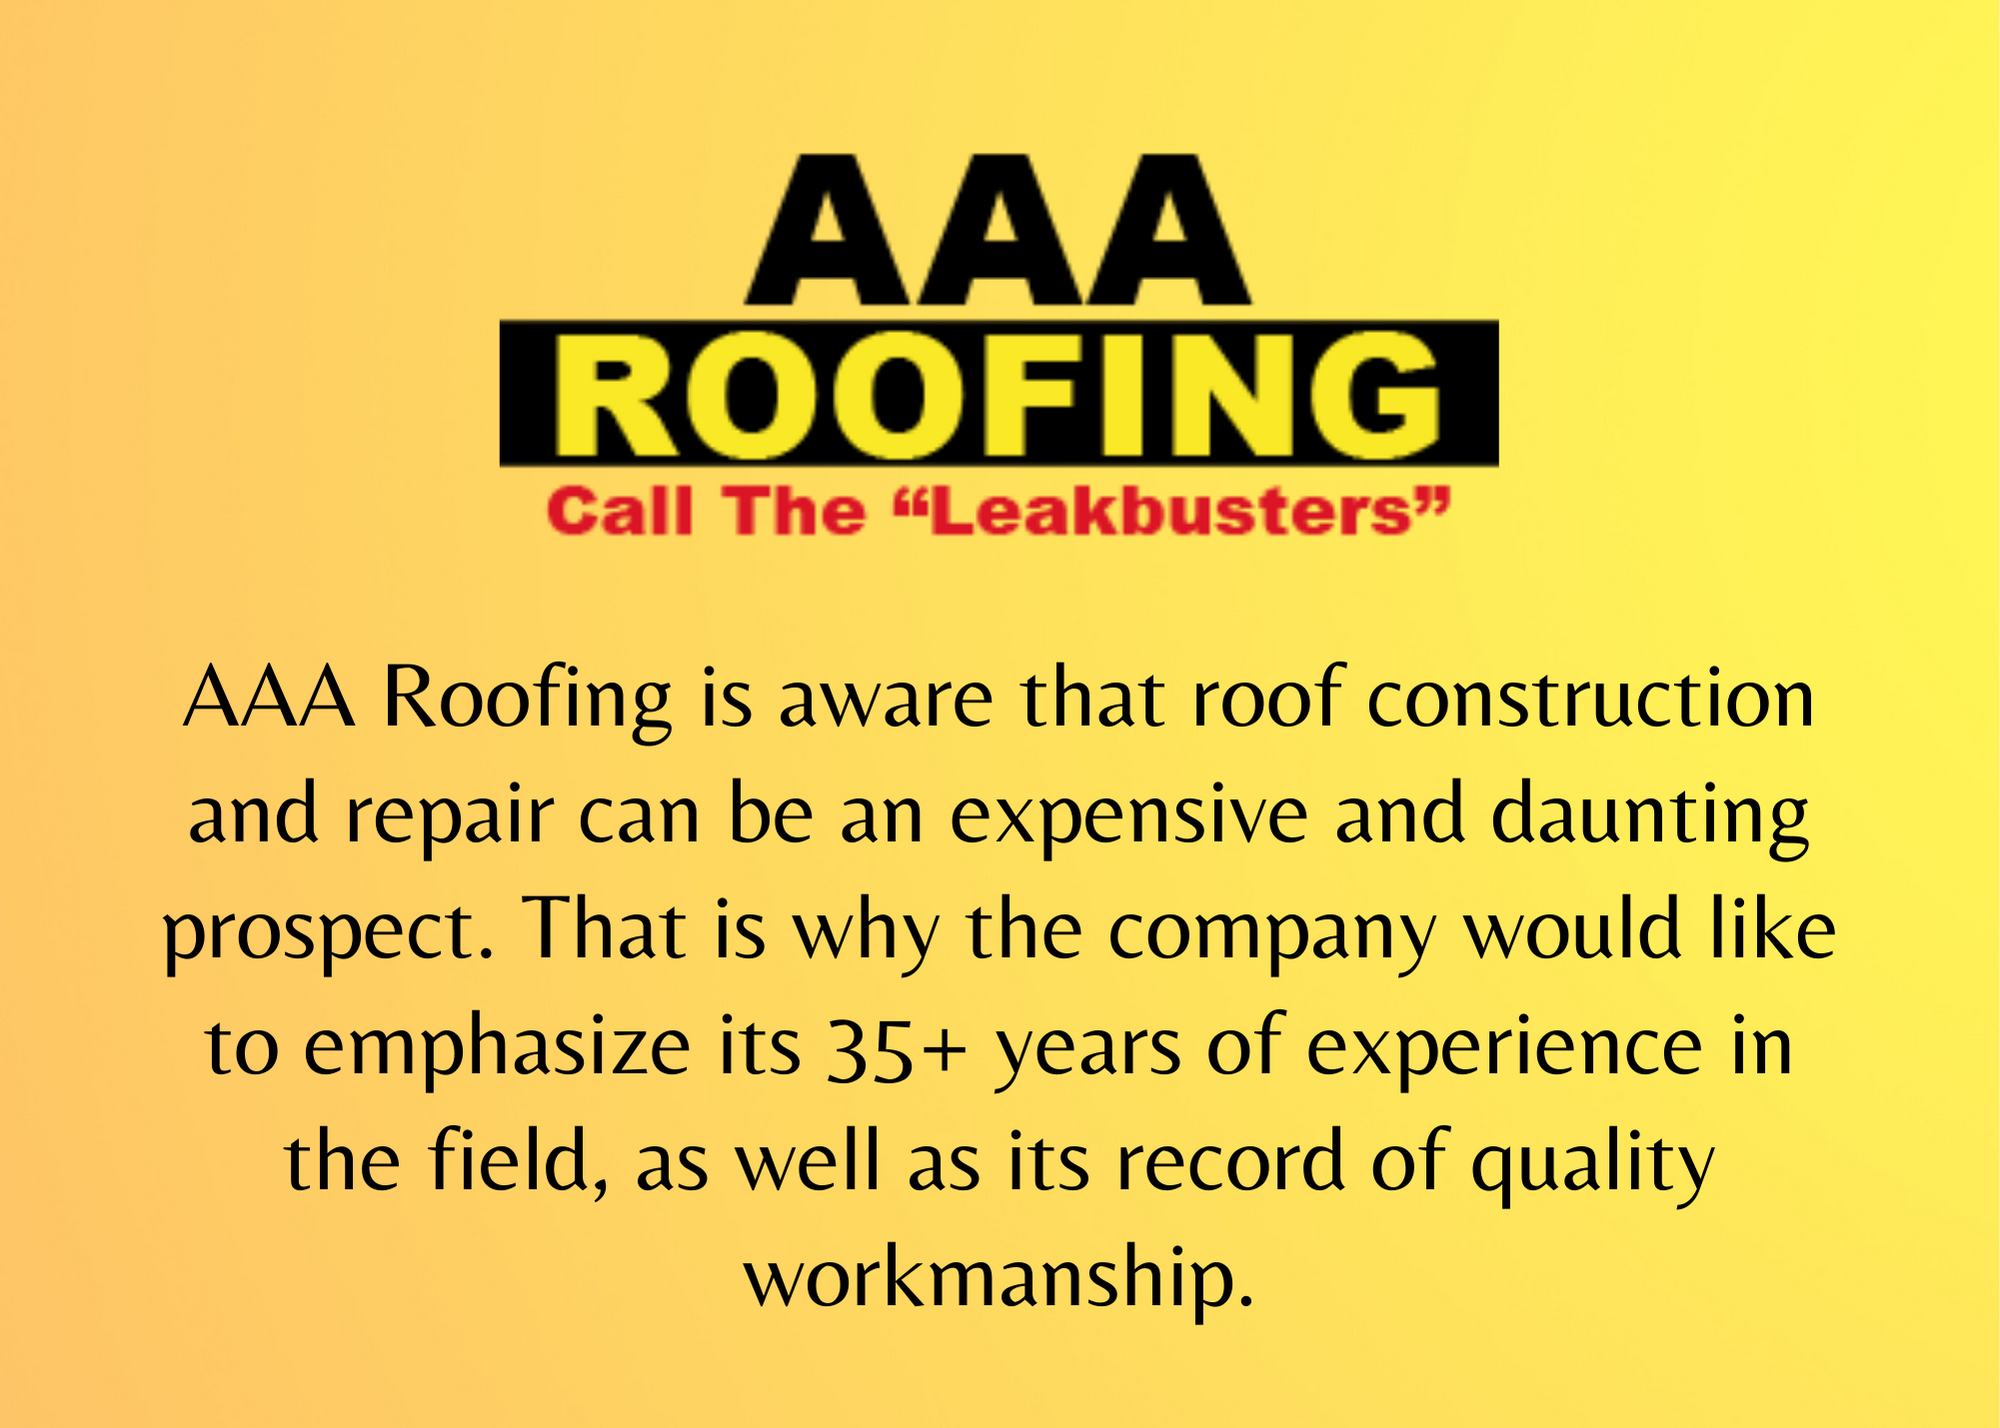 AAA Roofing, Monday, May 30, 2022, Press release picture